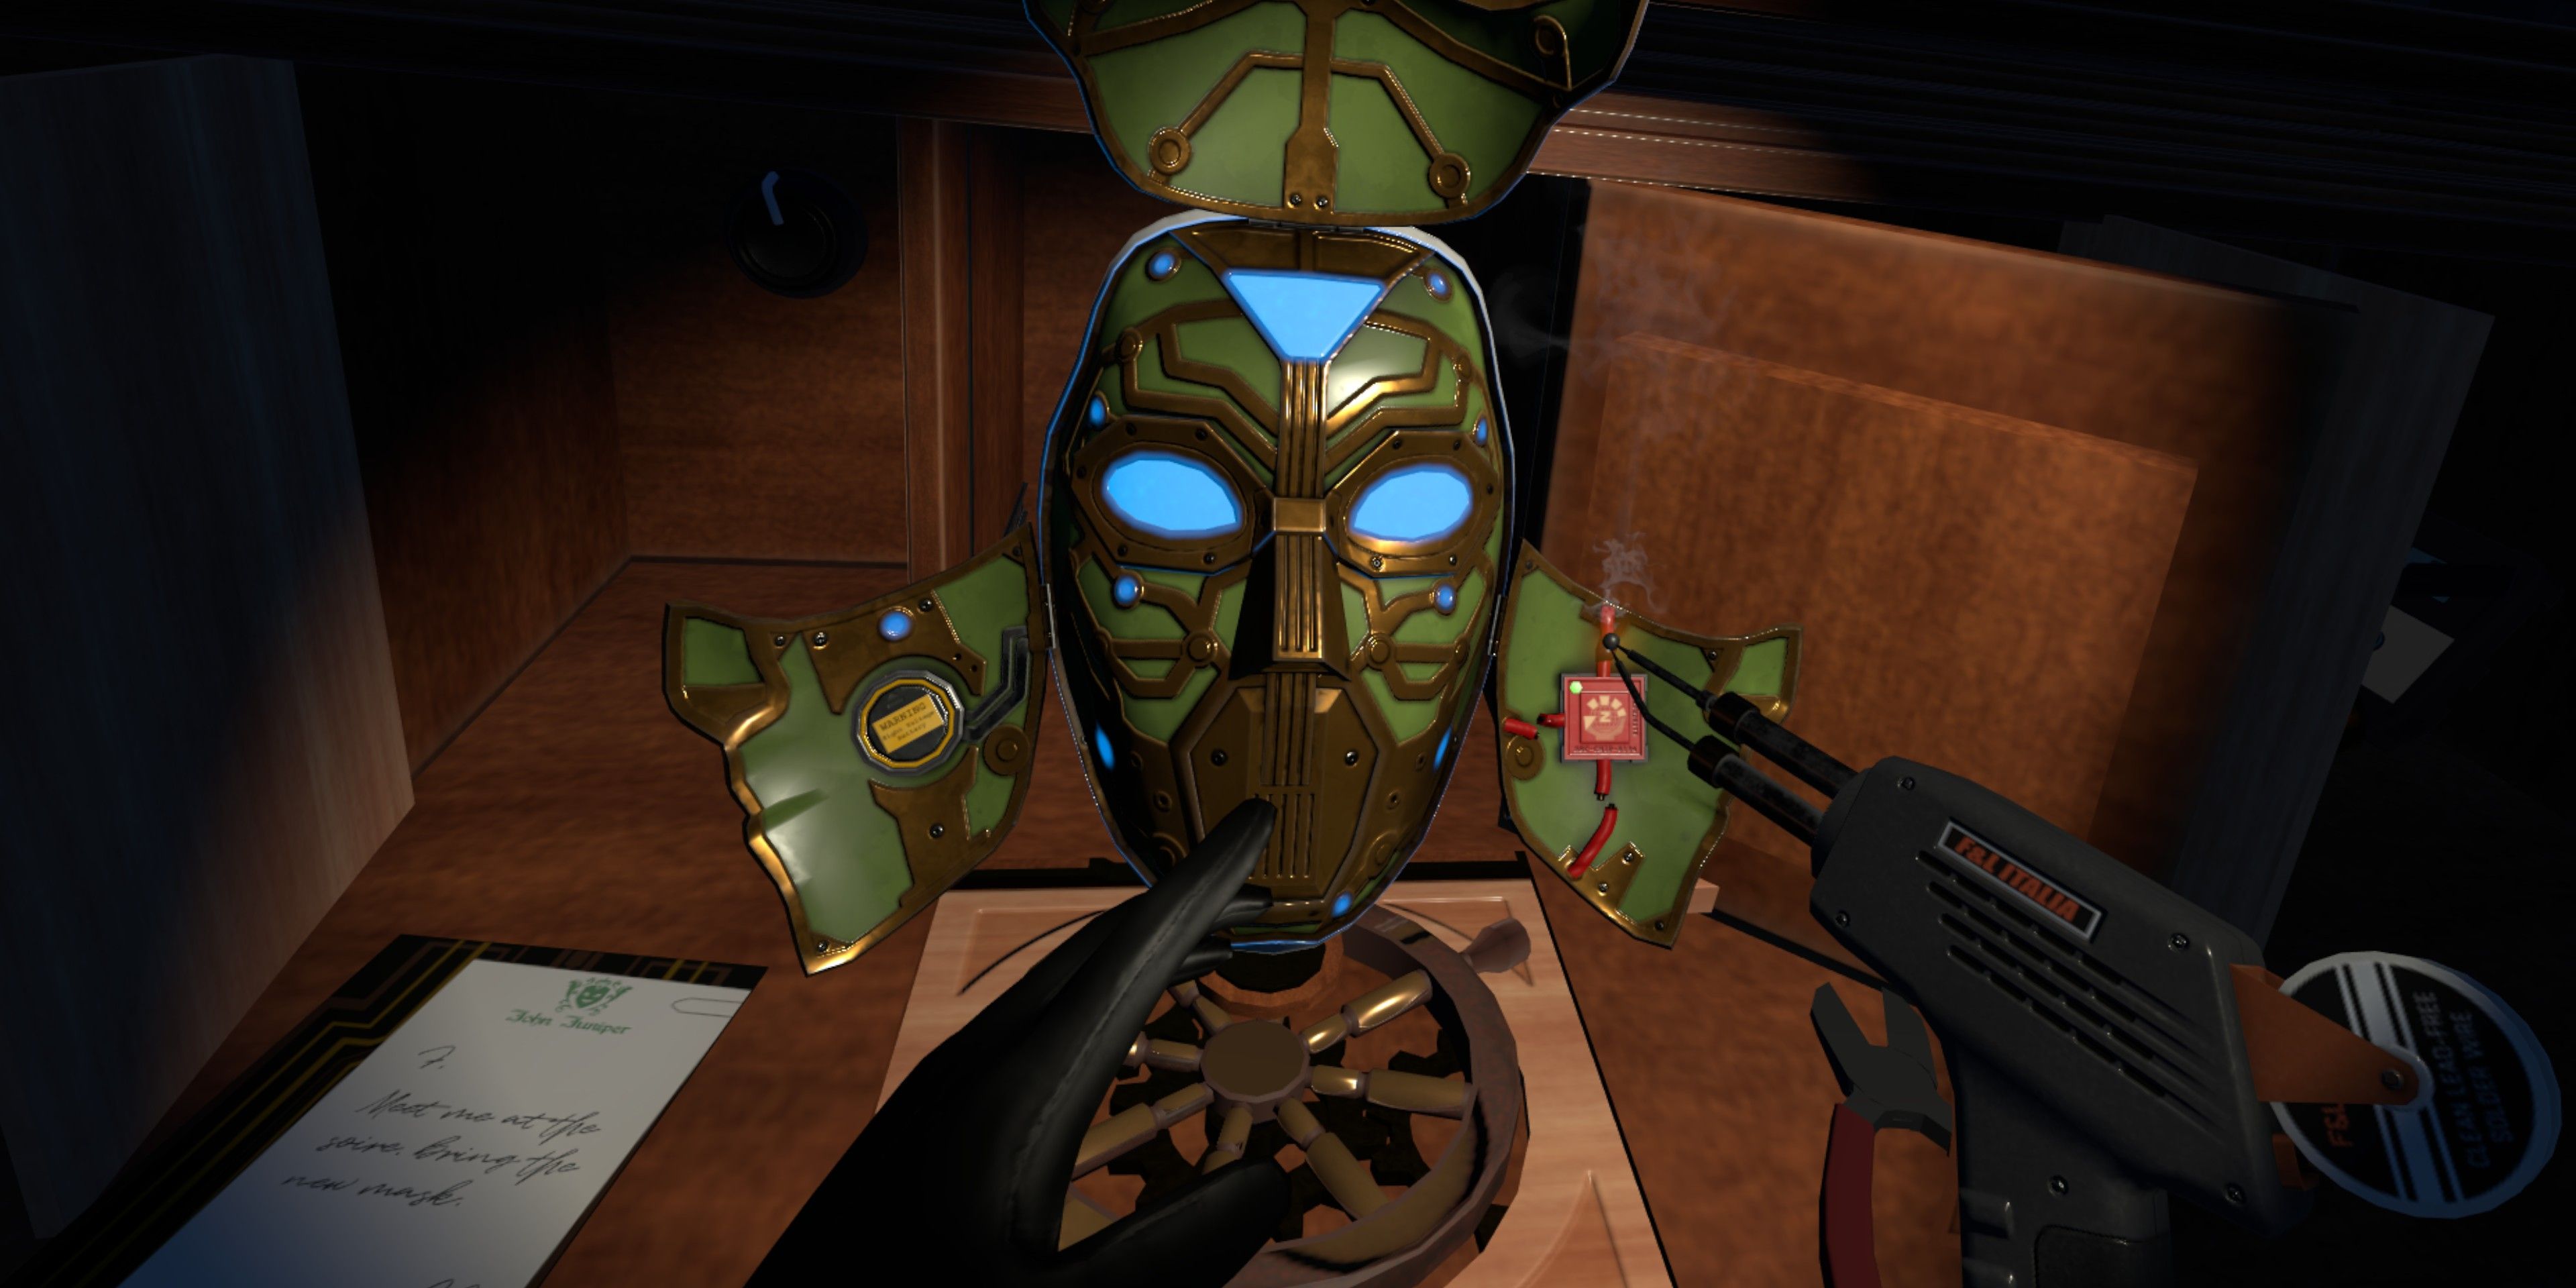 In-game view of I Expect You To Die 2 showing the interior of a mask filled with wiring and a soldering gun held to the wires.